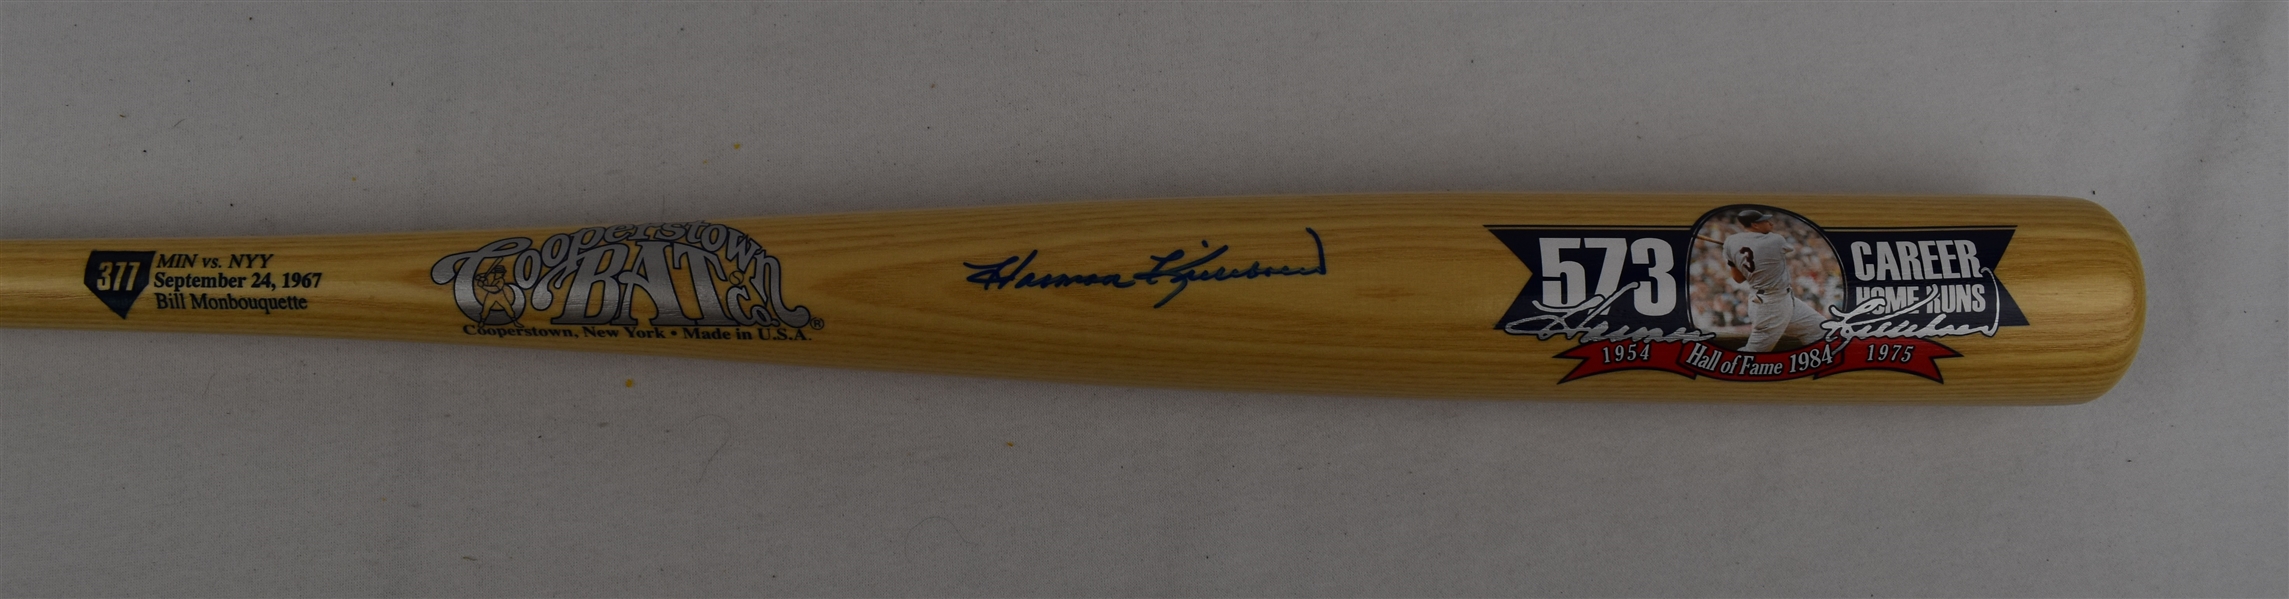 Harmon Killebrew Autographed Limited Edition Cooperstown Collection HR #377 Bat JSA